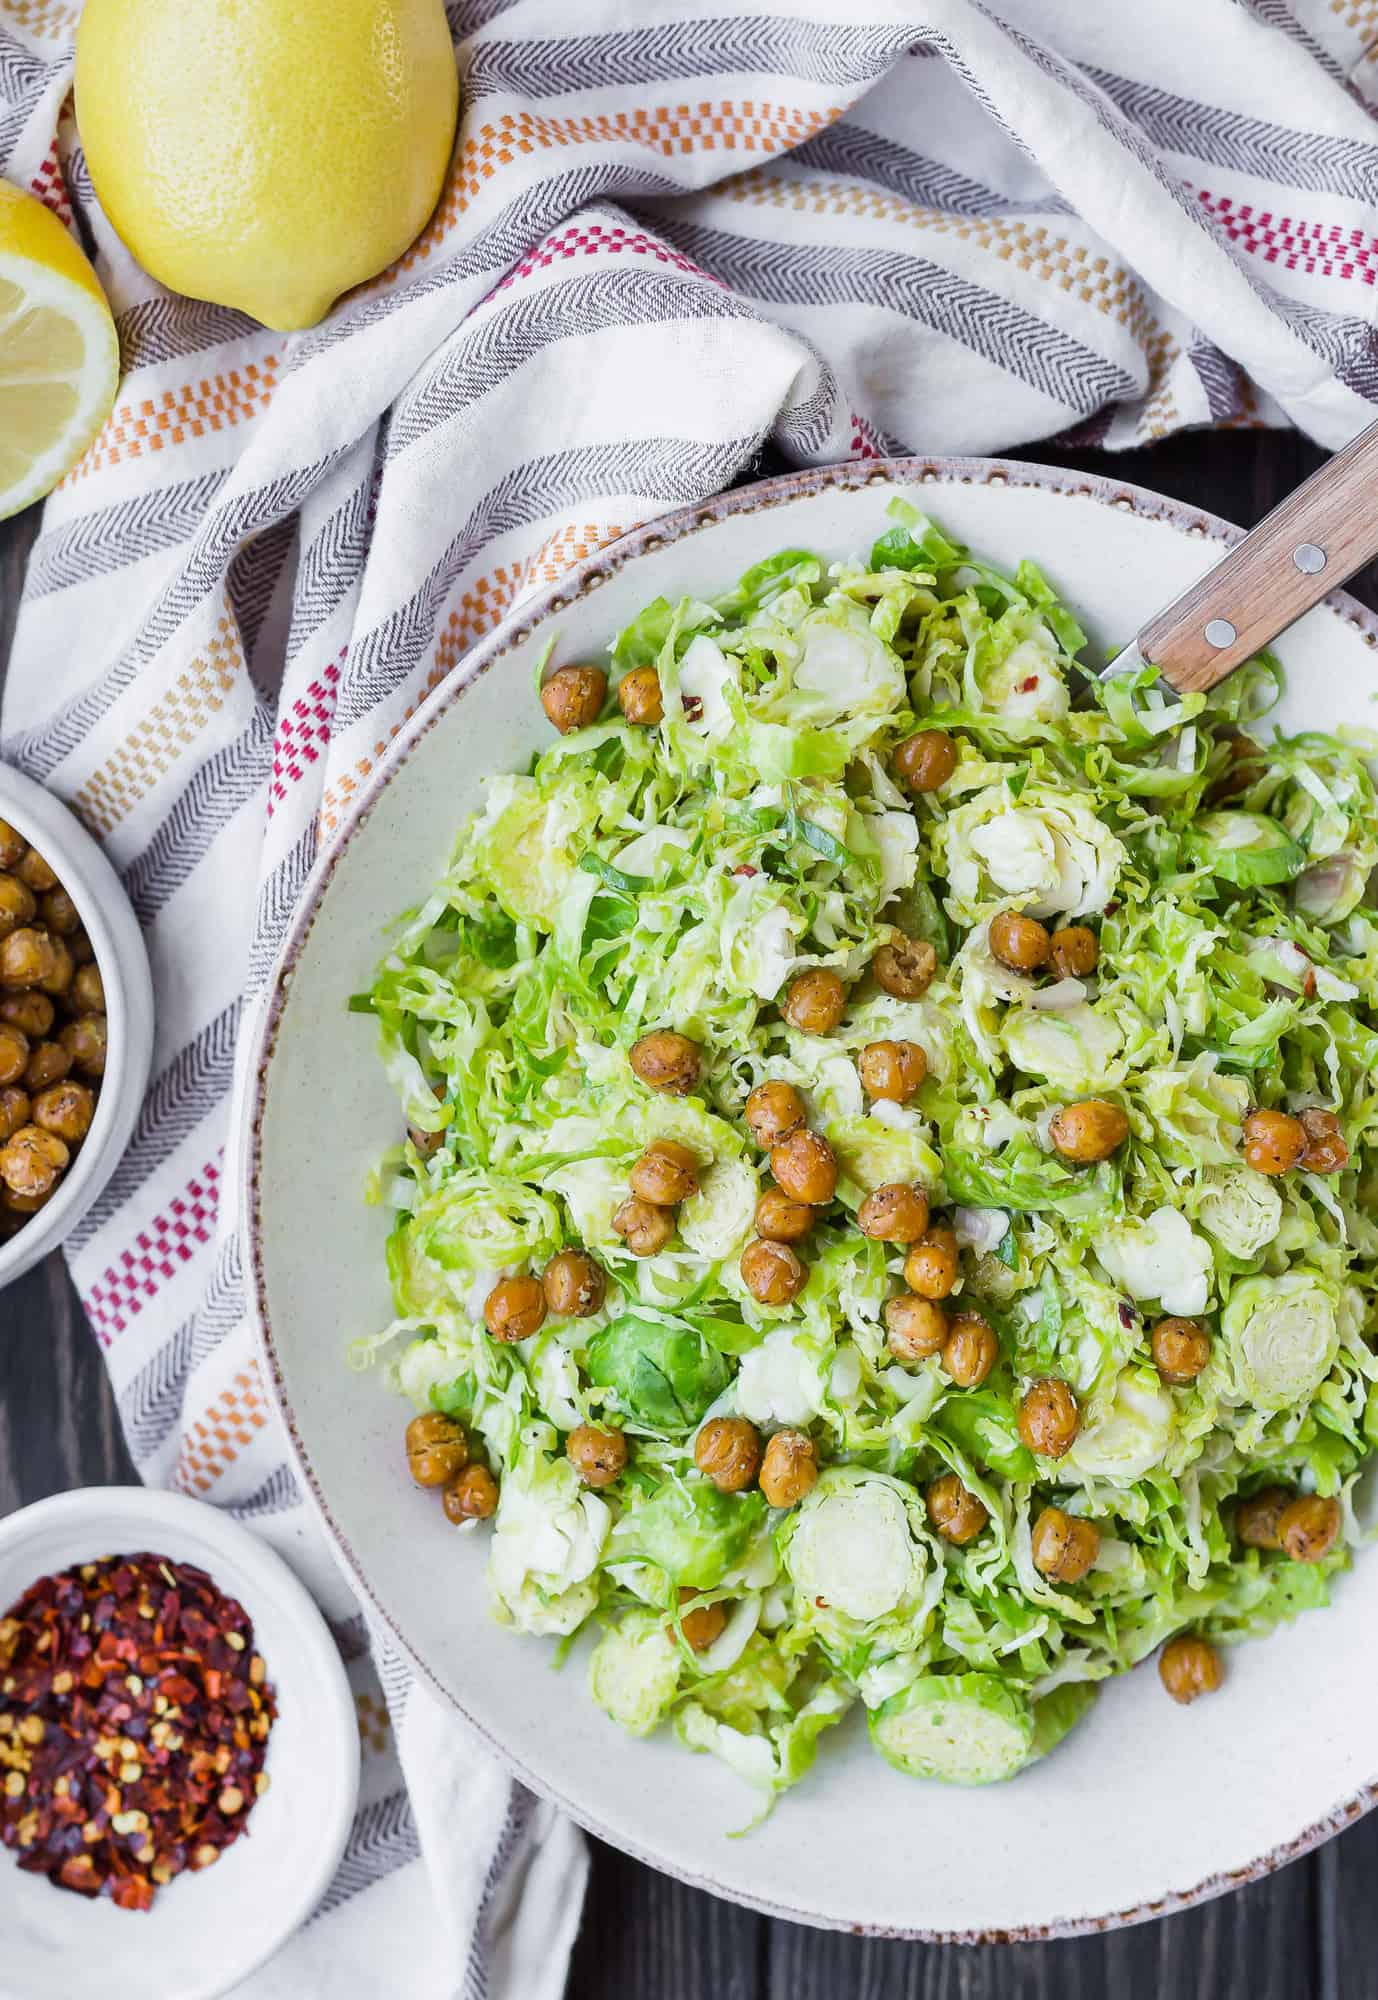 Overhead view of brussels sprouts salad with crispy chickpeas.